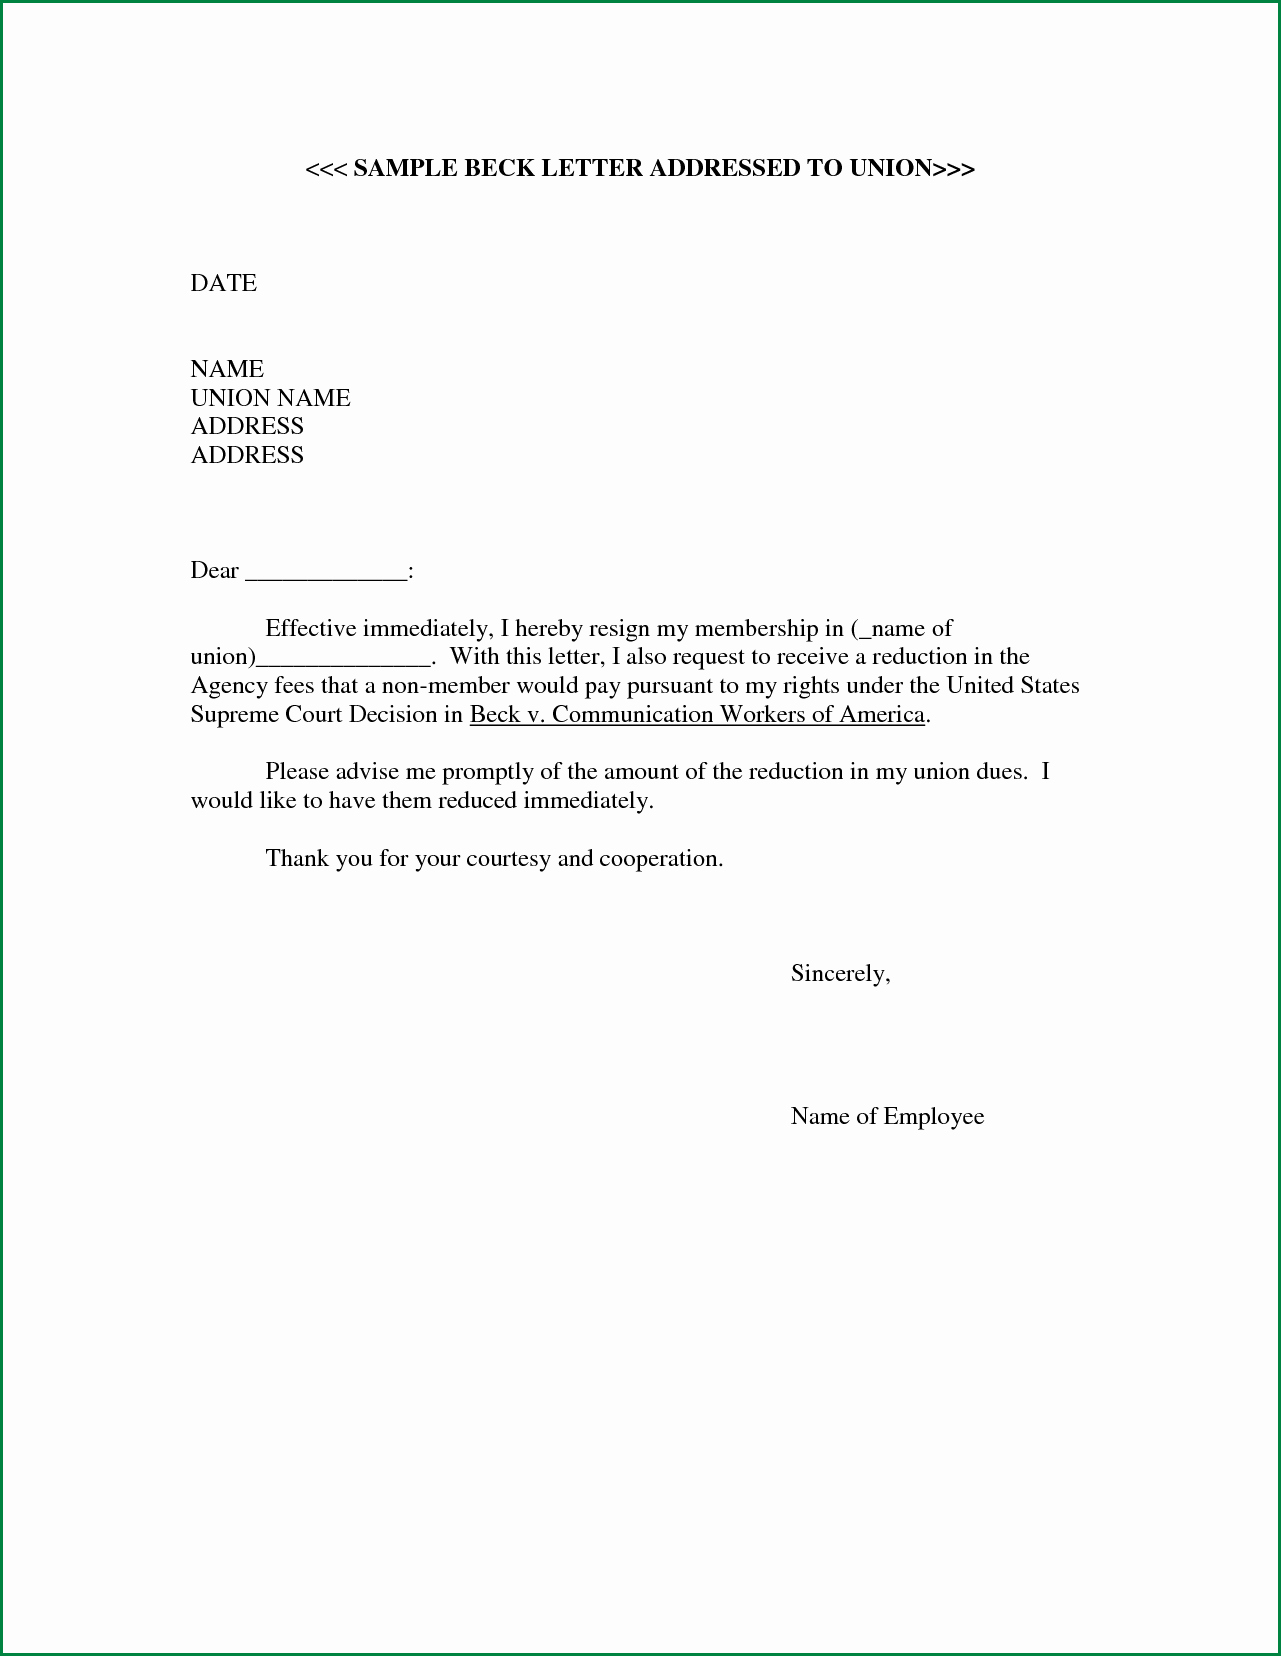 Resignation Letter Effective Immediately New 27 Of Personal Info Template Union